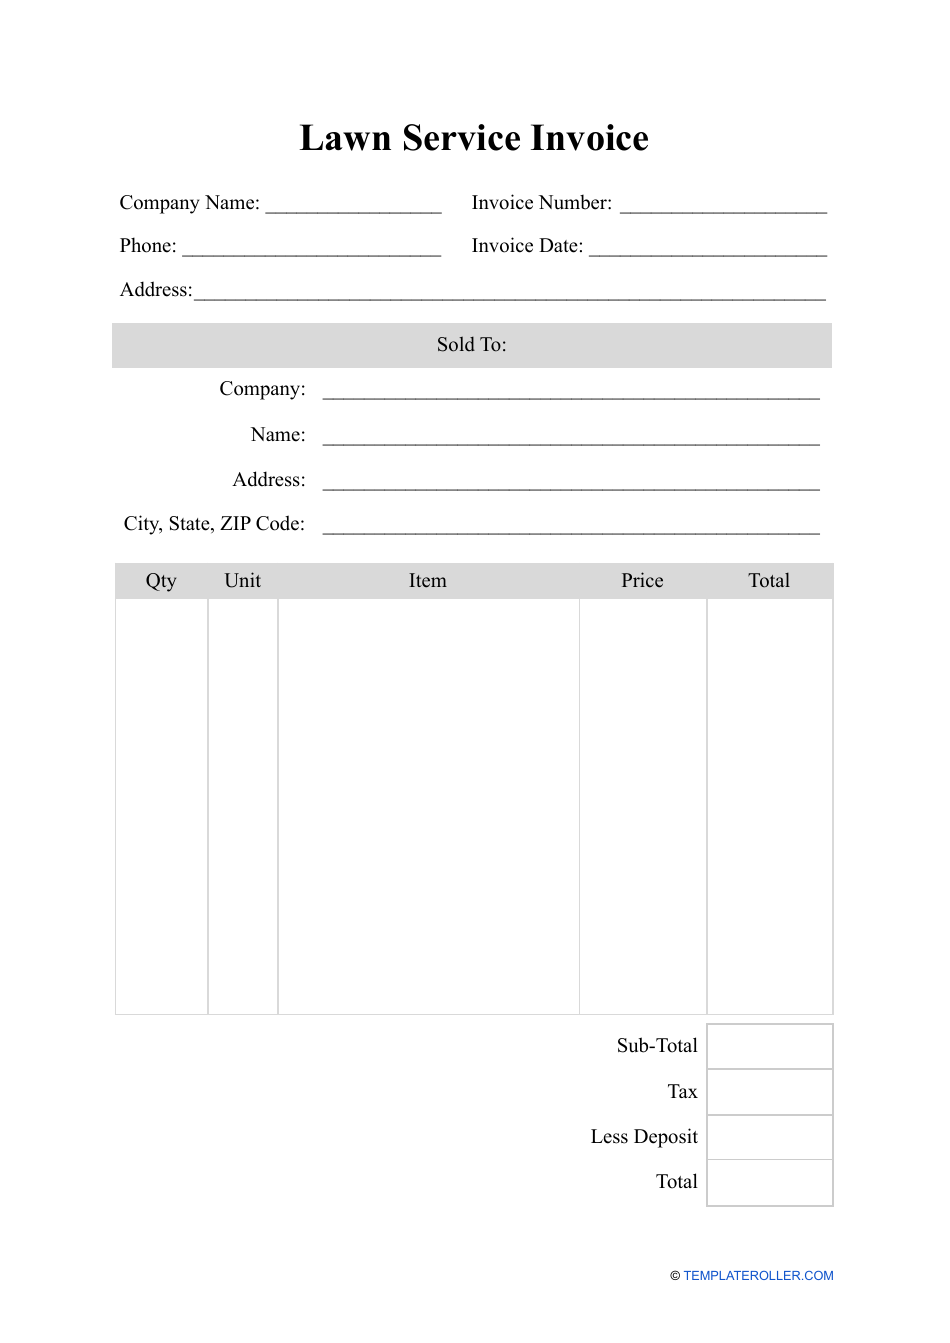 Lawn Service Invoice Template Fill Out, Sign Online and Download PDF